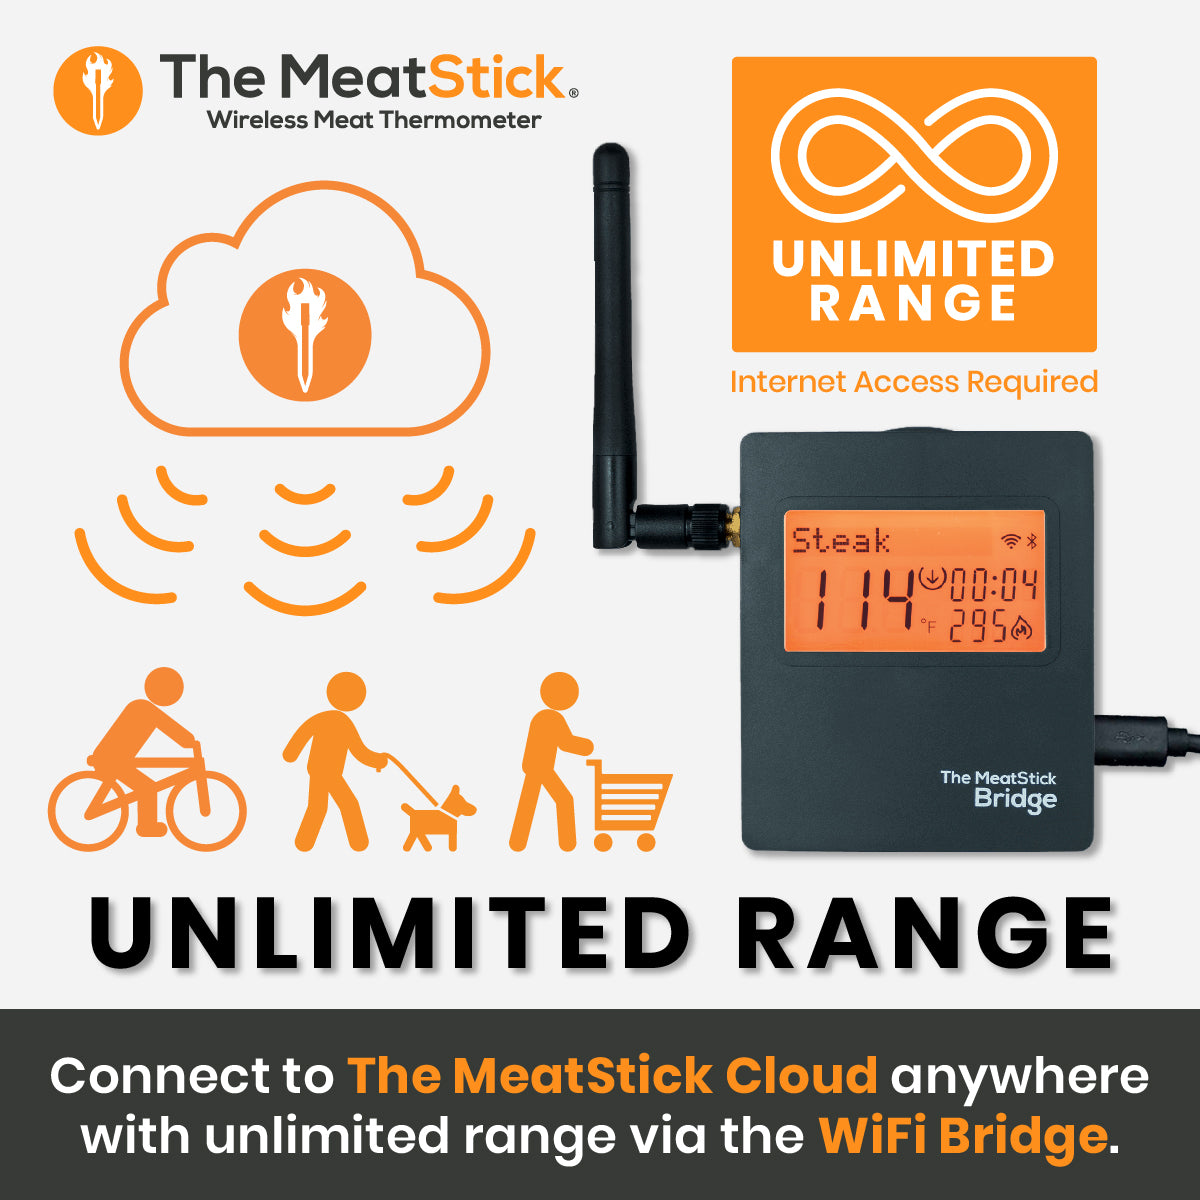 Smart Wireless Meat Thermometer - Meat°it Plus